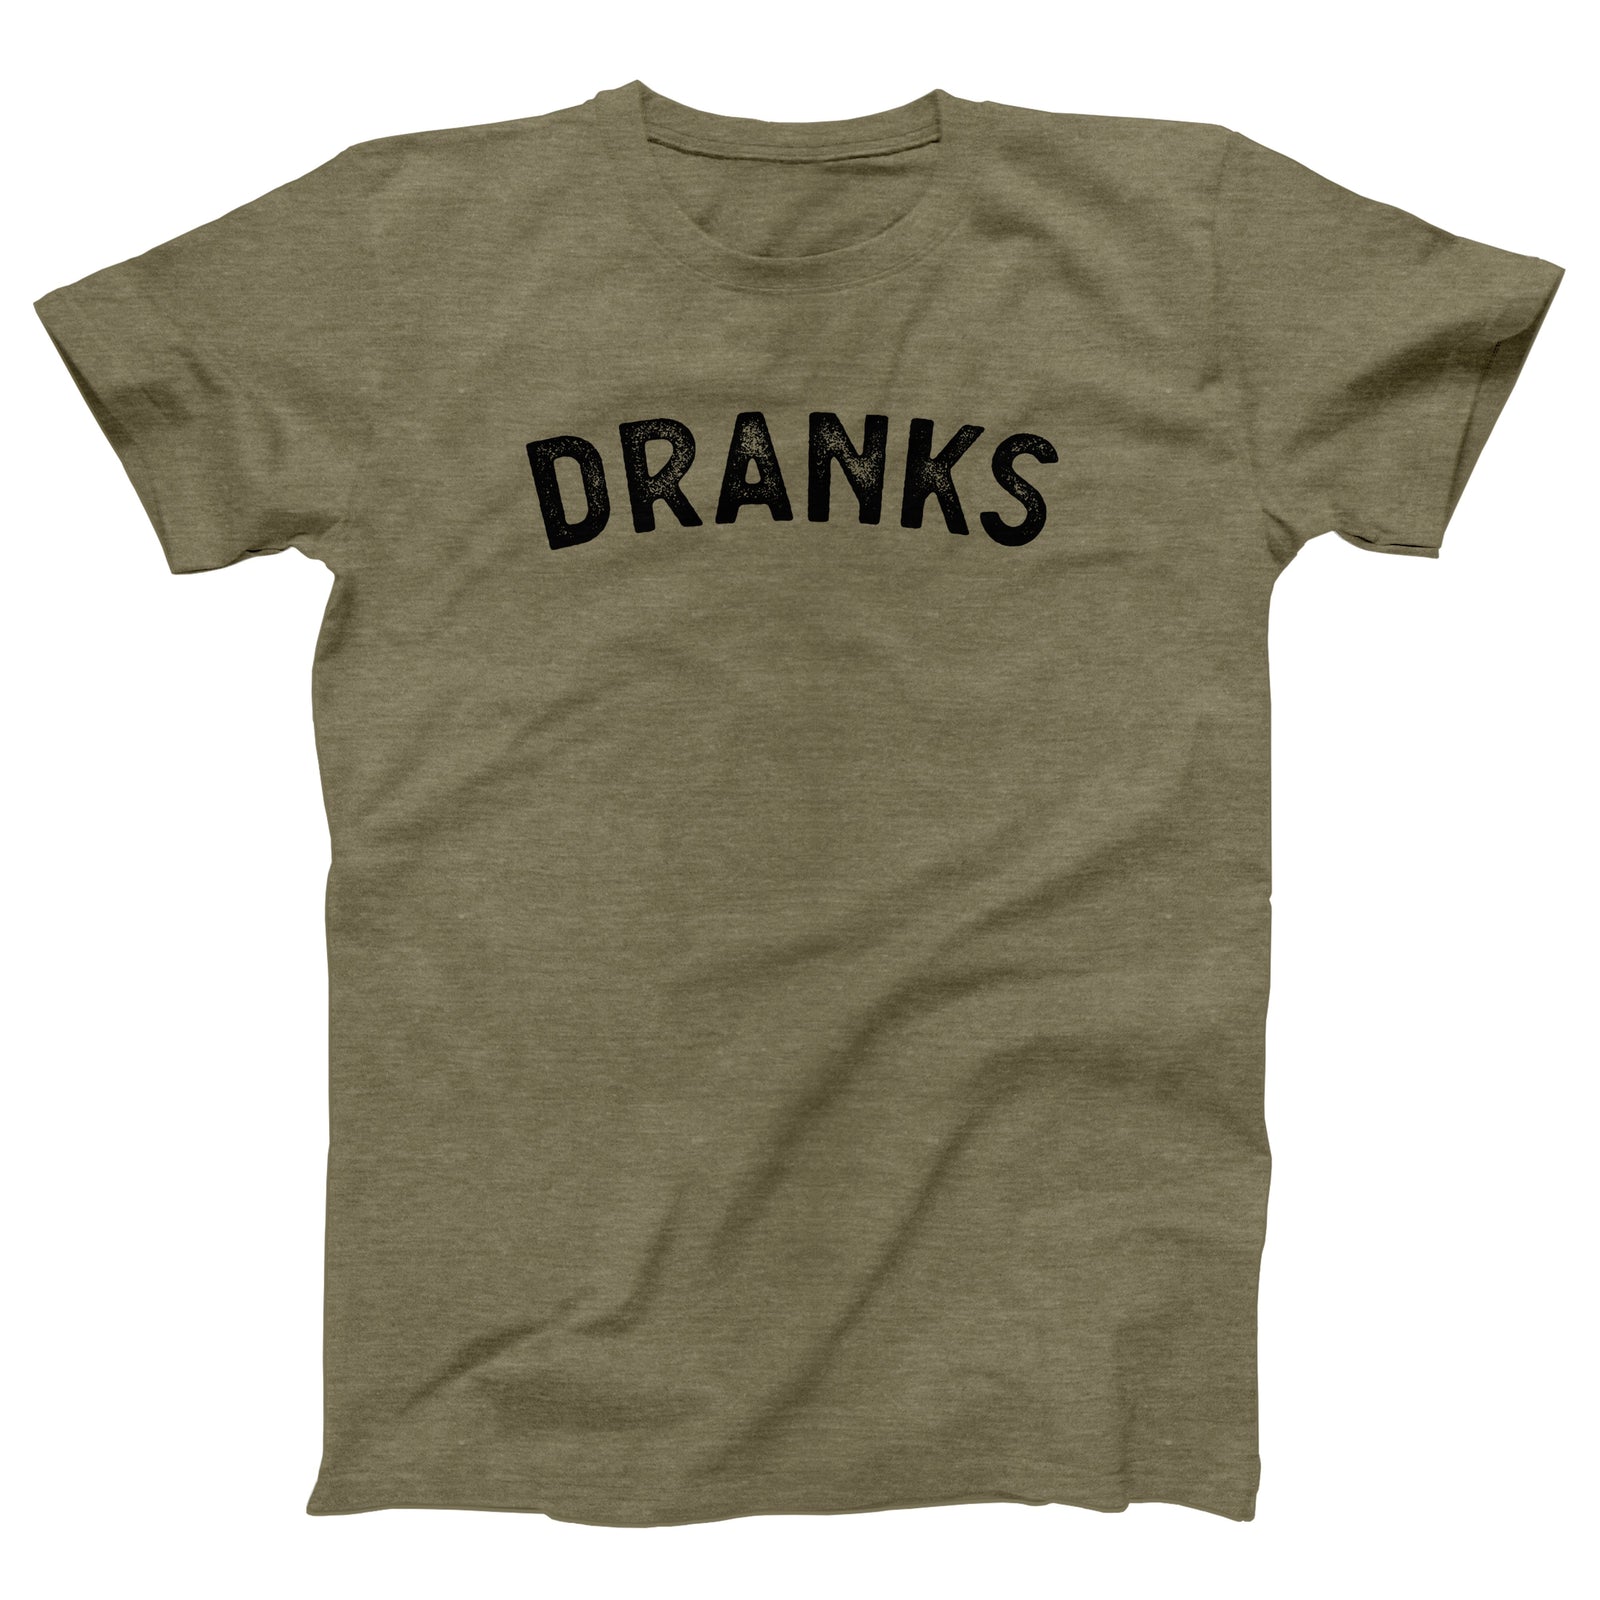 //cdn.shopify.com/s/files/1/0274/2488/2766/products/dranks-menunisex-t-shirt-596256_5000x.jpg?v=1645605255 5000w,
    //cdn.shopify.com/s/files/1/0274/2488/2766/products/dranks-menunisex-t-shirt-596256_4500x.jpg?v=1645605255 4500w,
    //cdn.shopify.com/s/files/1/0274/2488/2766/products/dranks-menunisex-t-shirt-596256_4000x.jpg?v=1645605255 4000w,
    //cdn.shopify.com/s/files/1/0274/2488/2766/products/dranks-menunisex-t-shirt-596256_3500x.jpg?v=1645605255 3500w,
    //cdn.shopify.com/s/files/1/0274/2488/2766/products/dranks-menunisex-t-shirt-596256_3000x.jpg?v=1645605255 3000w,
    //cdn.shopify.com/s/files/1/0274/2488/2766/products/dranks-menunisex-t-shirt-596256_2500x.jpg?v=1645605255 2500w,
    //cdn.shopify.com/s/files/1/0274/2488/2766/products/dranks-menunisex-t-shirt-596256_2000x.jpg?v=1645605255 2000w,
    //cdn.shopify.com/s/files/1/0274/2488/2766/products/dranks-menunisex-t-shirt-596256_1800x.jpg?v=1645605255 1800w,
    //cdn.shopify.com/s/files/1/0274/2488/2766/products/dranks-menunisex-t-shirt-596256_1600x.jpg?v=1645605255 1600w,
    //cdn.shopify.com/s/files/1/0274/2488/2766/products/dranks-menunisex-t-shirt-596256_1400x.jpg?v=1645605255 1400w,
    //cdn.shopify.com/s/files/1/0274/2488/2766/products/dranks-menunisex-t-shirt-596256_1200x.jpg?v=1645605255 1200w,
    //cdn.shopify.com/s/files/1/0274/2488/2766/products/dranks-menunisex-t-shirt-596256_1000x.jpg?v=1645605255 1000w,
    //cdn.shopify.com/s/files/1/0274/2488/2766/products/dranks-menunisex-t-shirt-596256_800x.jpg?v=1645605255 800w,
    //cdn.shopify.com/s/files/1/0274/2488/2766/products/dranks-menunisex-t-shirt-596256_600x.jpg?v=1645605255 600w,
    //cdn.shopify.com/s/files/1/0274/2488/2766/products/dranks-menunisex-t-shirt-596256_400x.jpg?v=1645605255 400w,
    //cdn.shopify.com/s/files/1/0274/2488/2766/products/dranks-menunisex-t-shirt-596256_200x.jpg?v=1645605255 200w